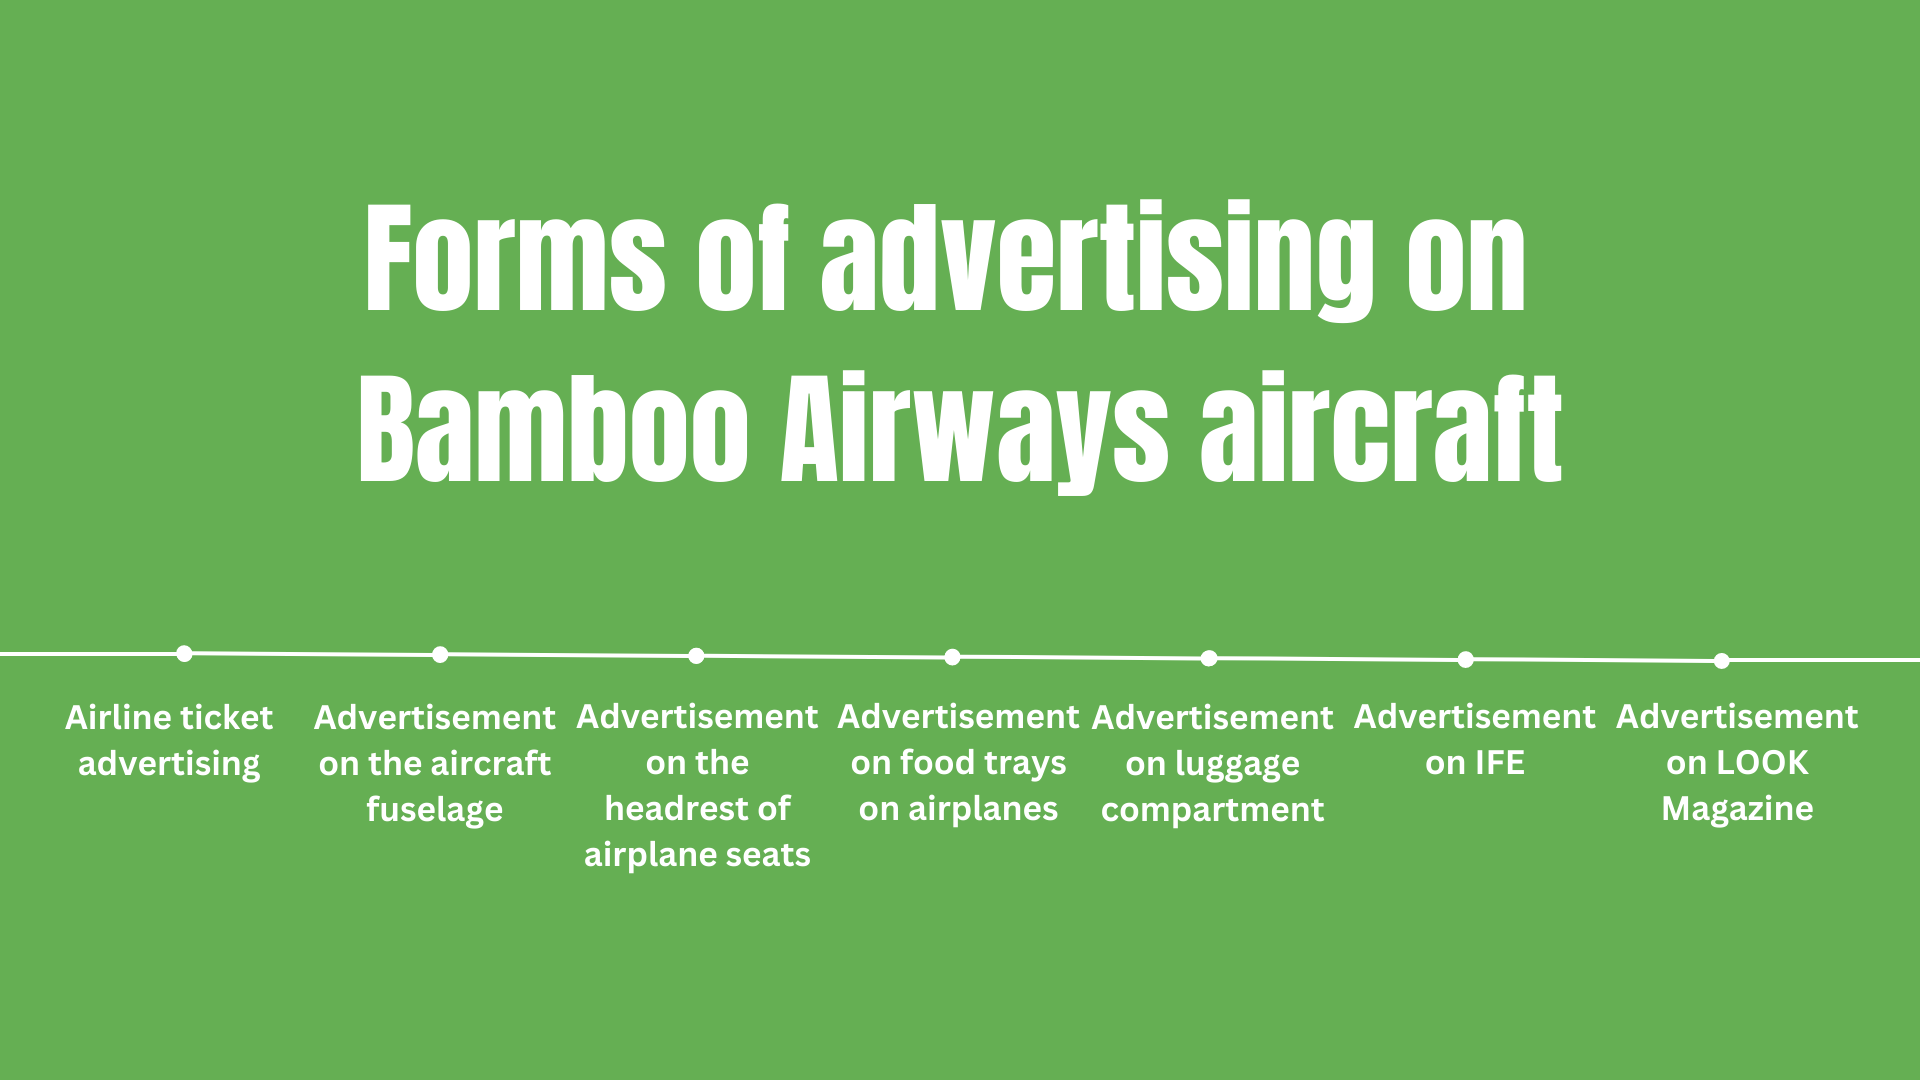 Forms of advertising on Bamboo Airways aircraft 